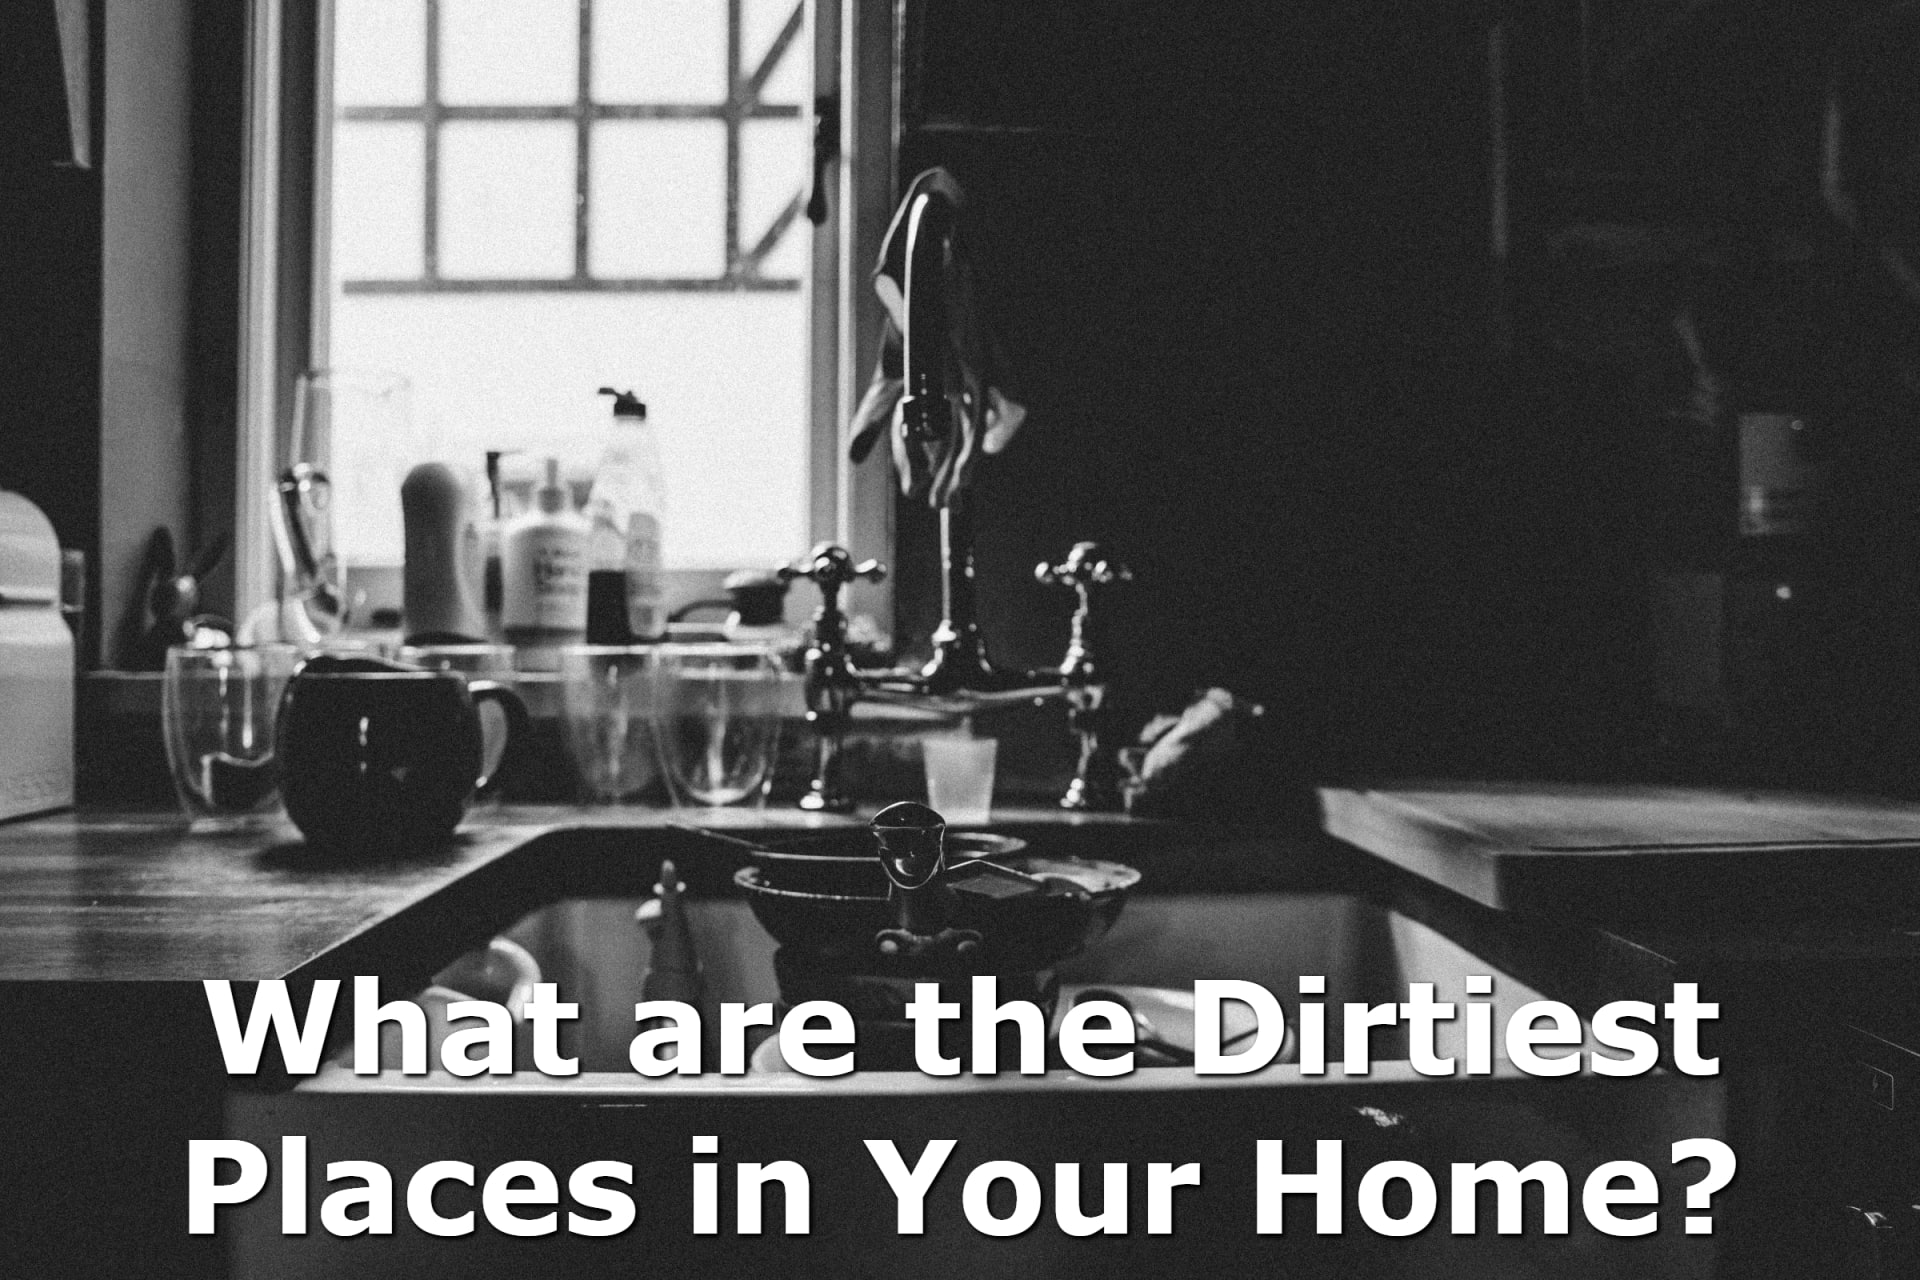 Dirty home in need of weekly cleaning service